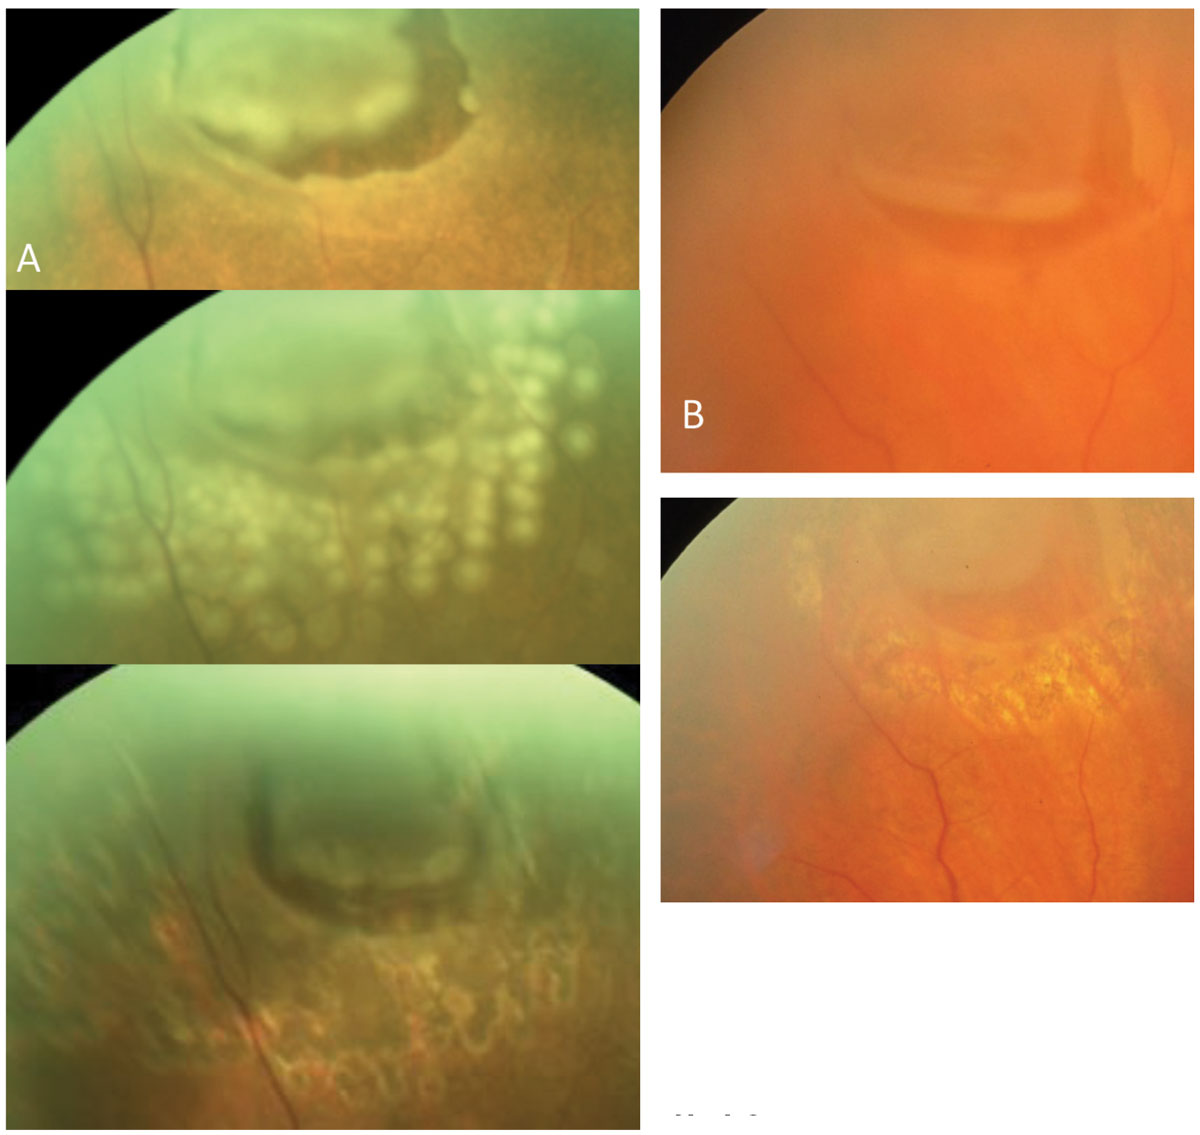 Fig. 14. Far left, horseshoe tears without retinal detachment (A) are treated with laser. The immediate and long-term of effect of laser (B) is shown, while in long-term hyperpigmentation.